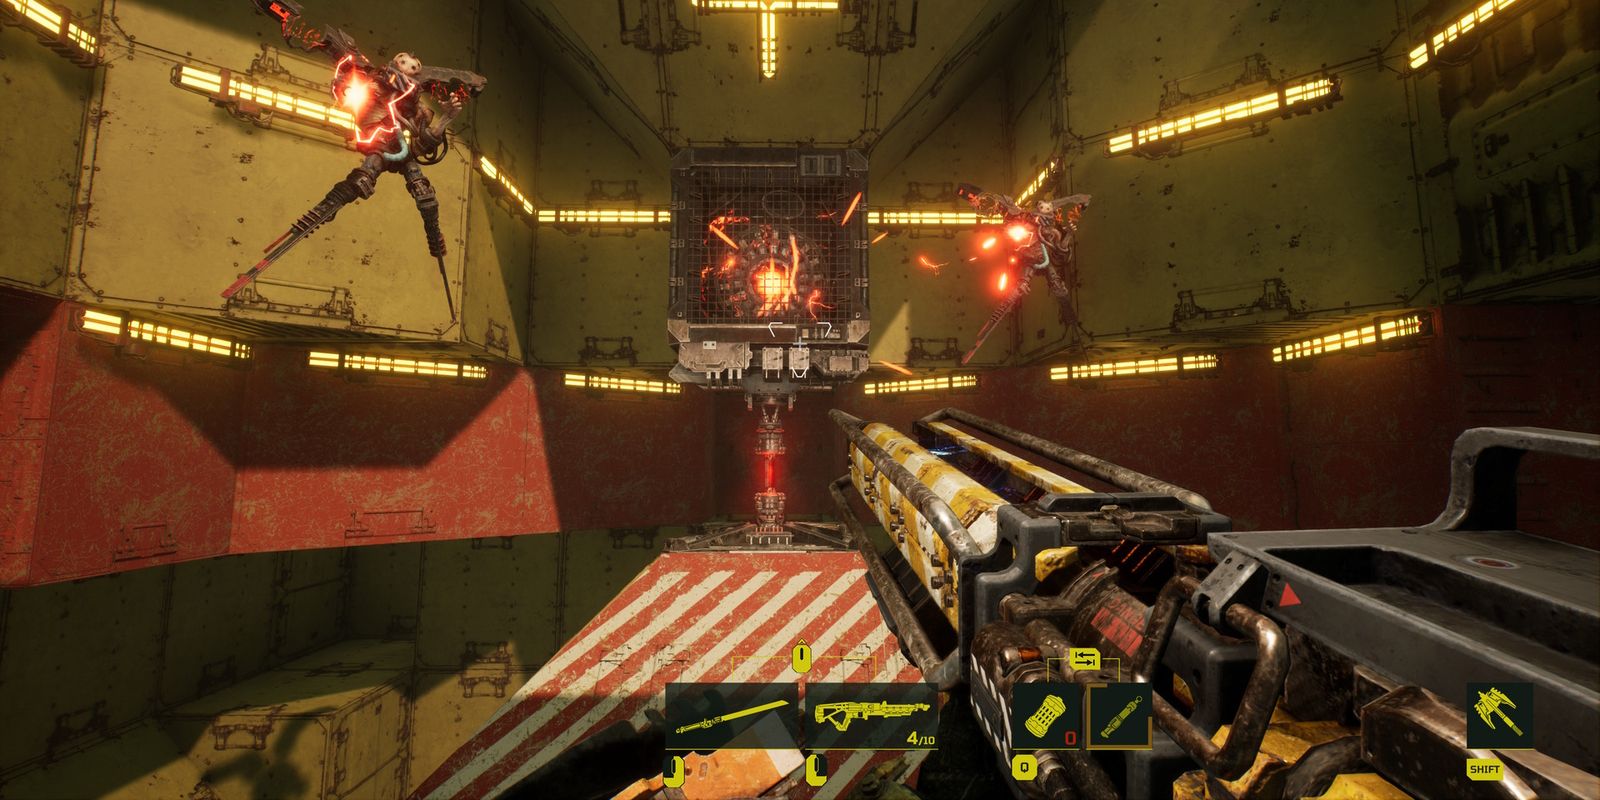 Meet Your Maker video game, with a first person perspective of the player holding a machine gun aiming at monsters with glowing red energy.